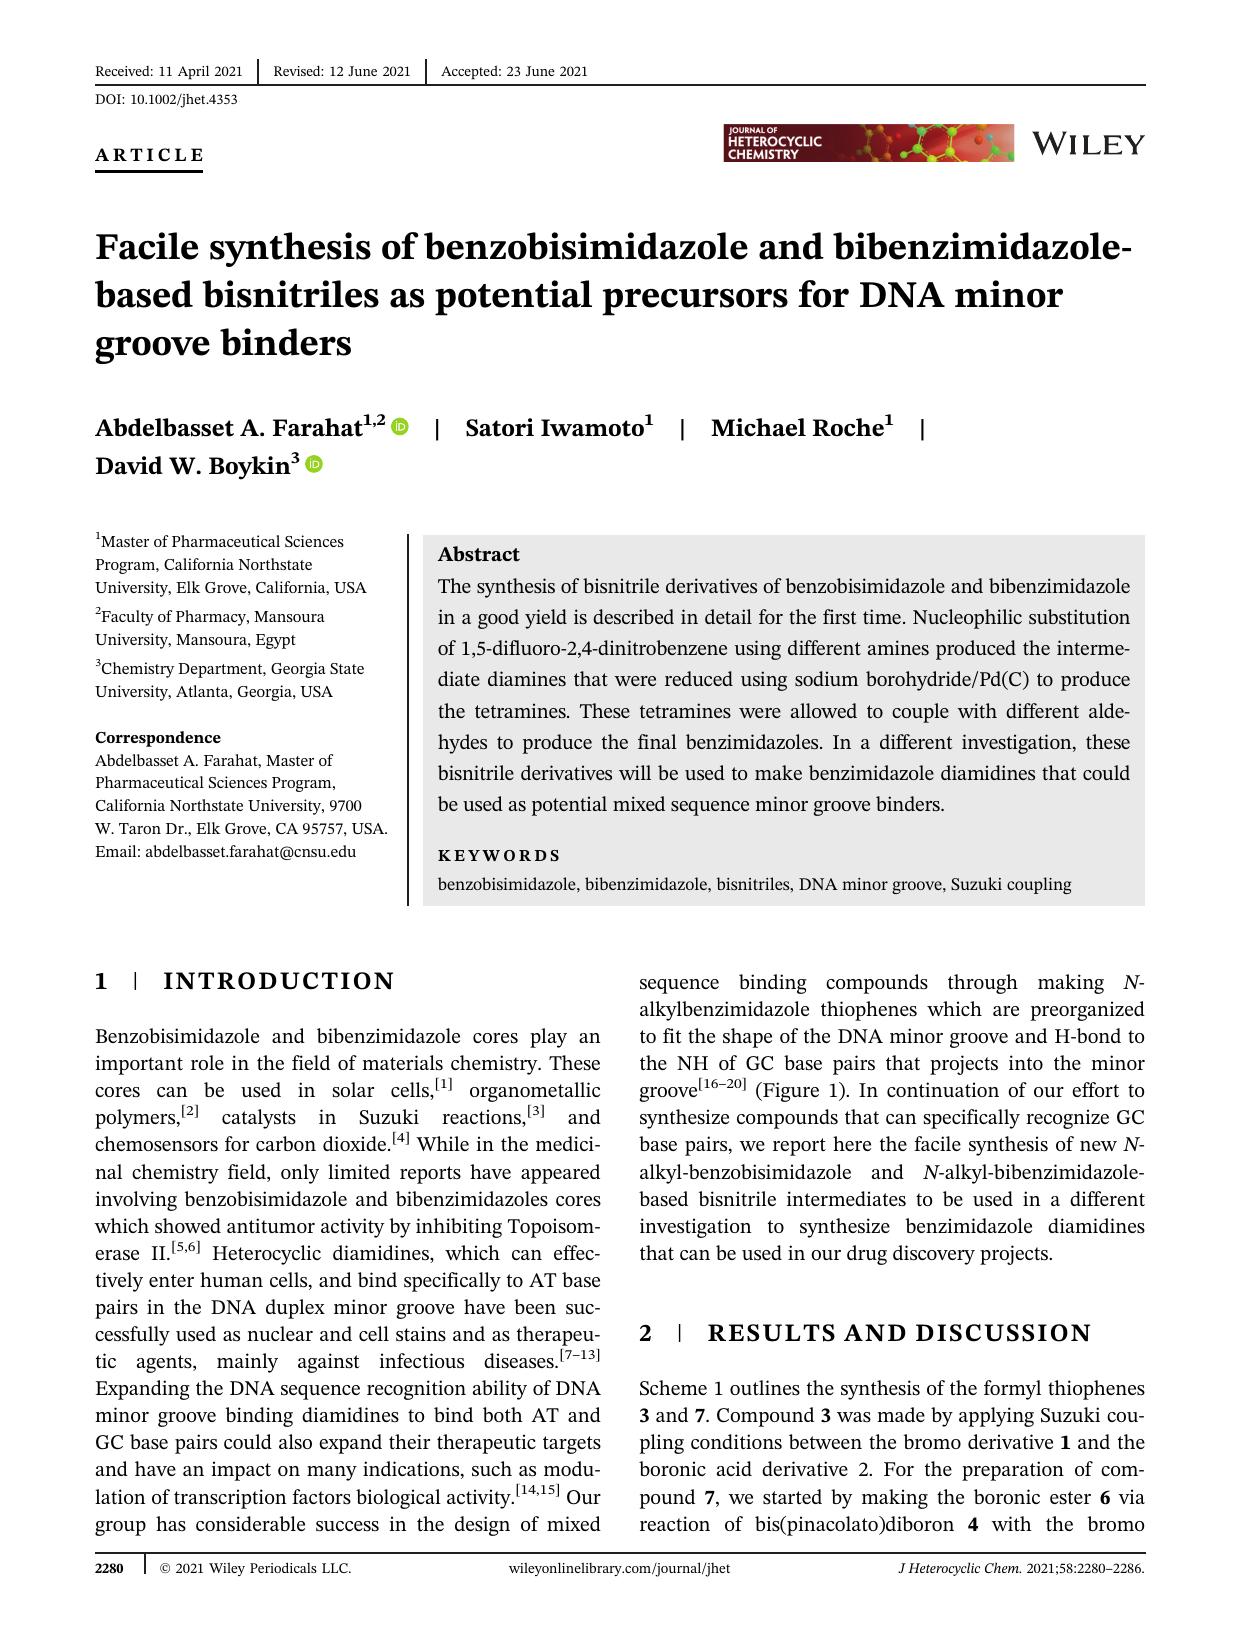 Facile synthesis of Benzobisimidazole and Bibenzimidazole-based bisnitriles as potential precursors for DNA minor groove binders. by Unknown